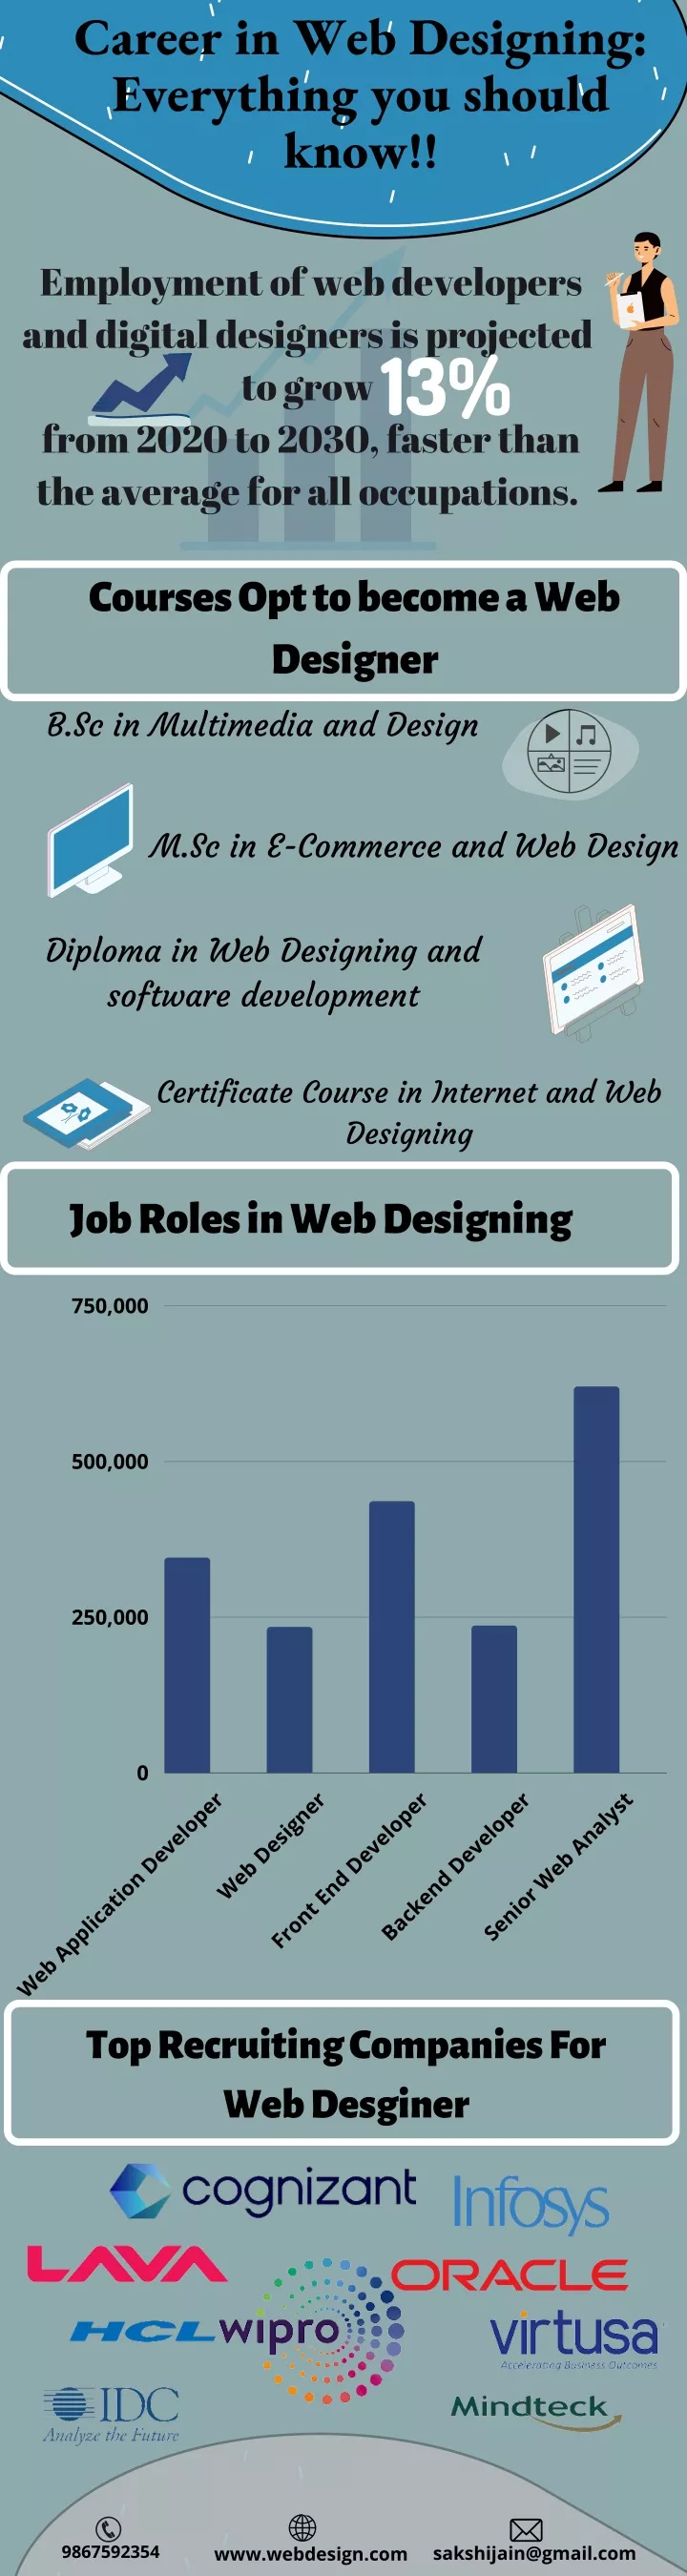 career in web designing everything you should know